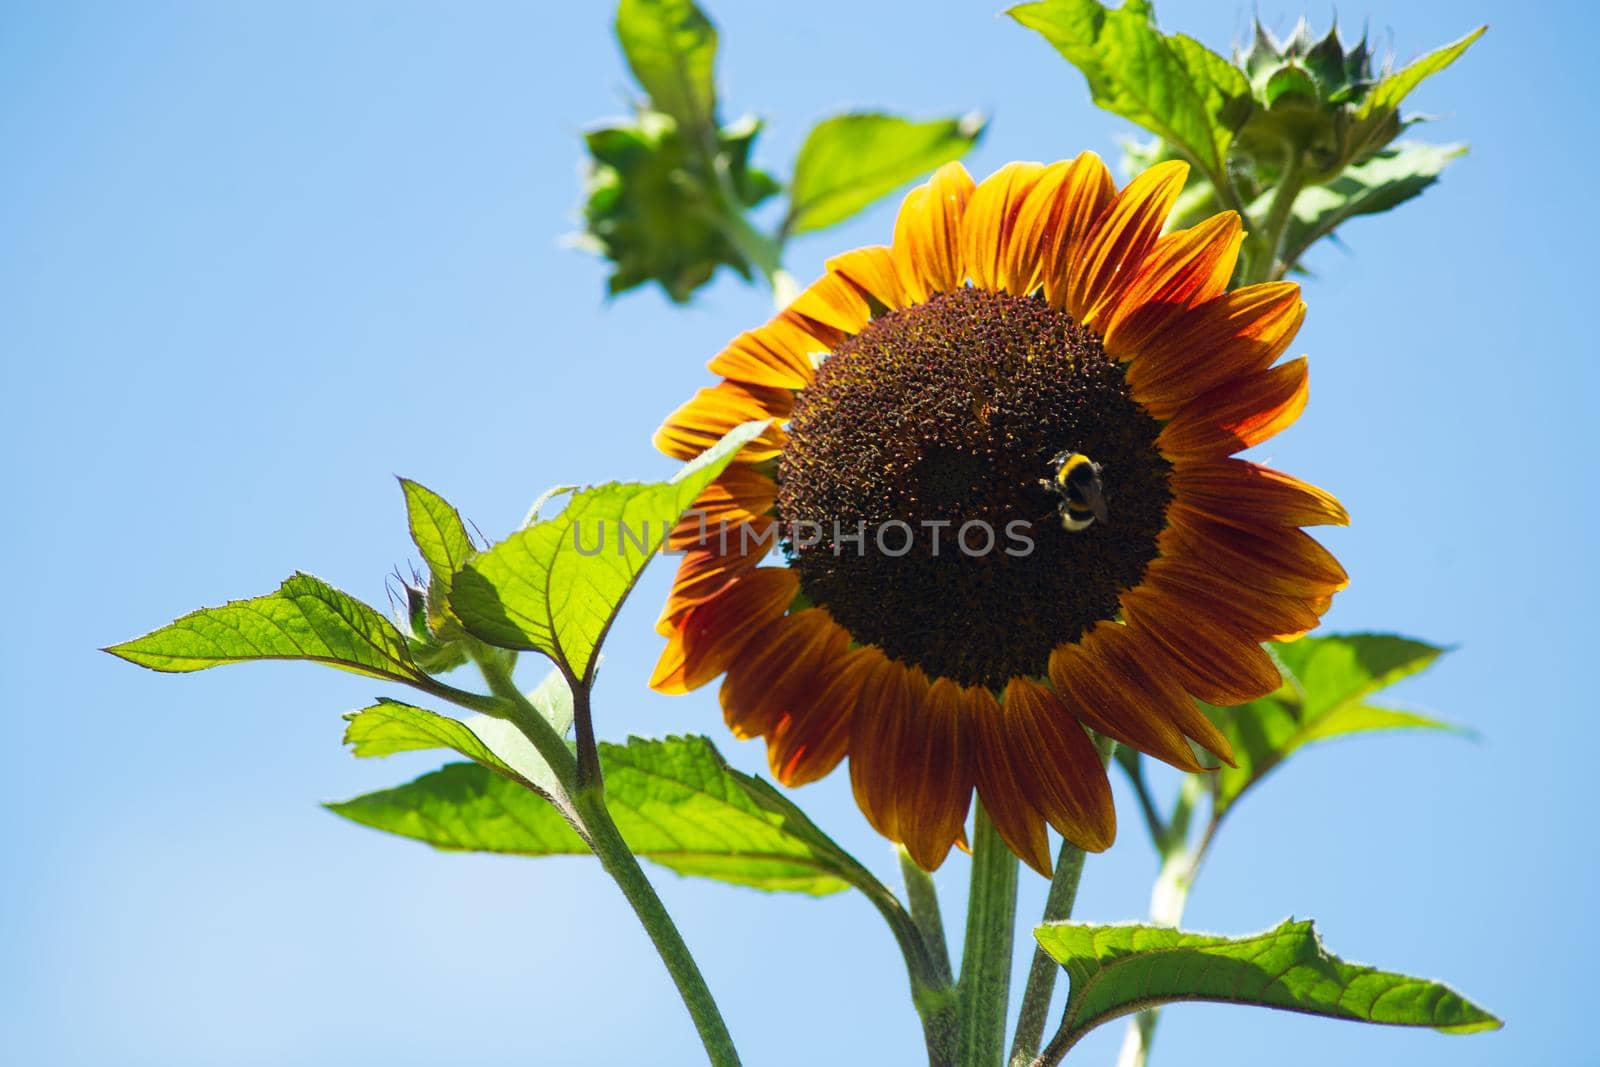 The chocolate sunflower is blooming by Tilo